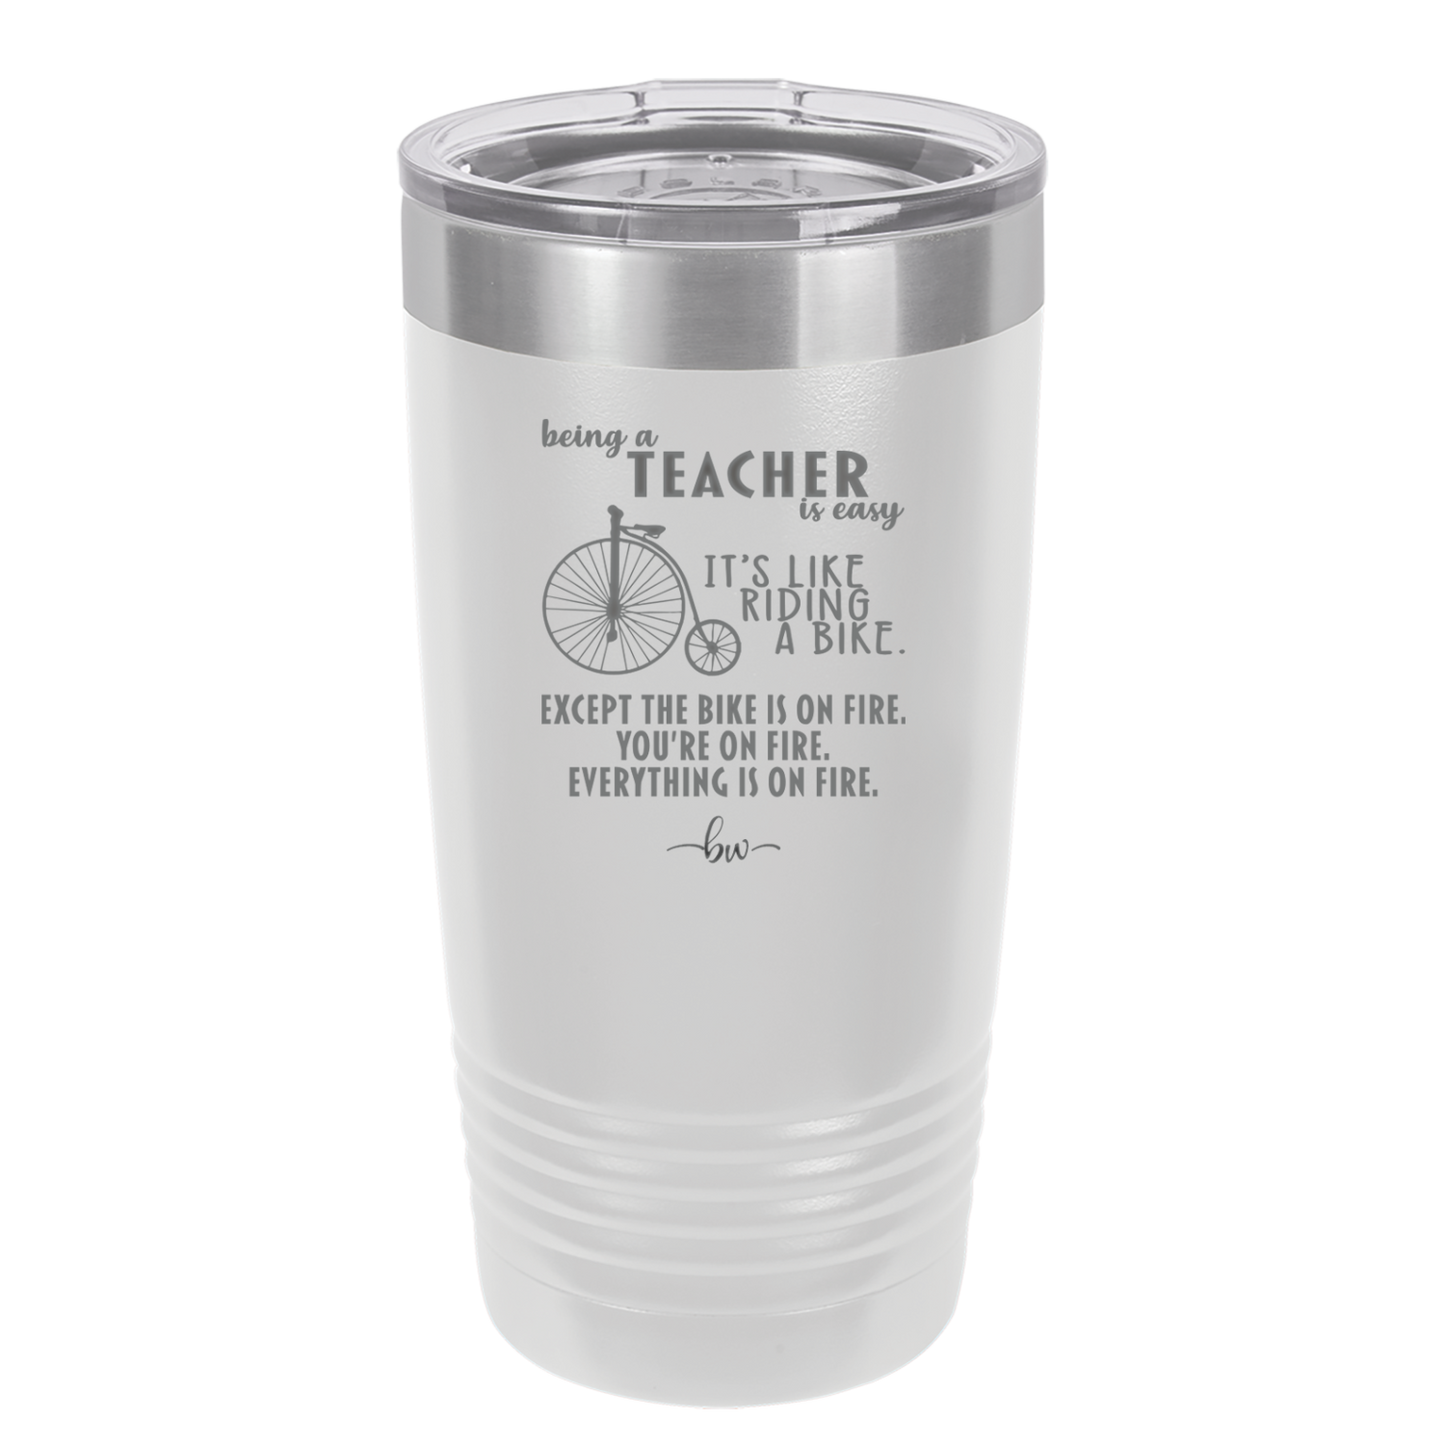 Being a Teacher is Easy - Laser Engraved Stainless Steel Drinkware - 1074 -